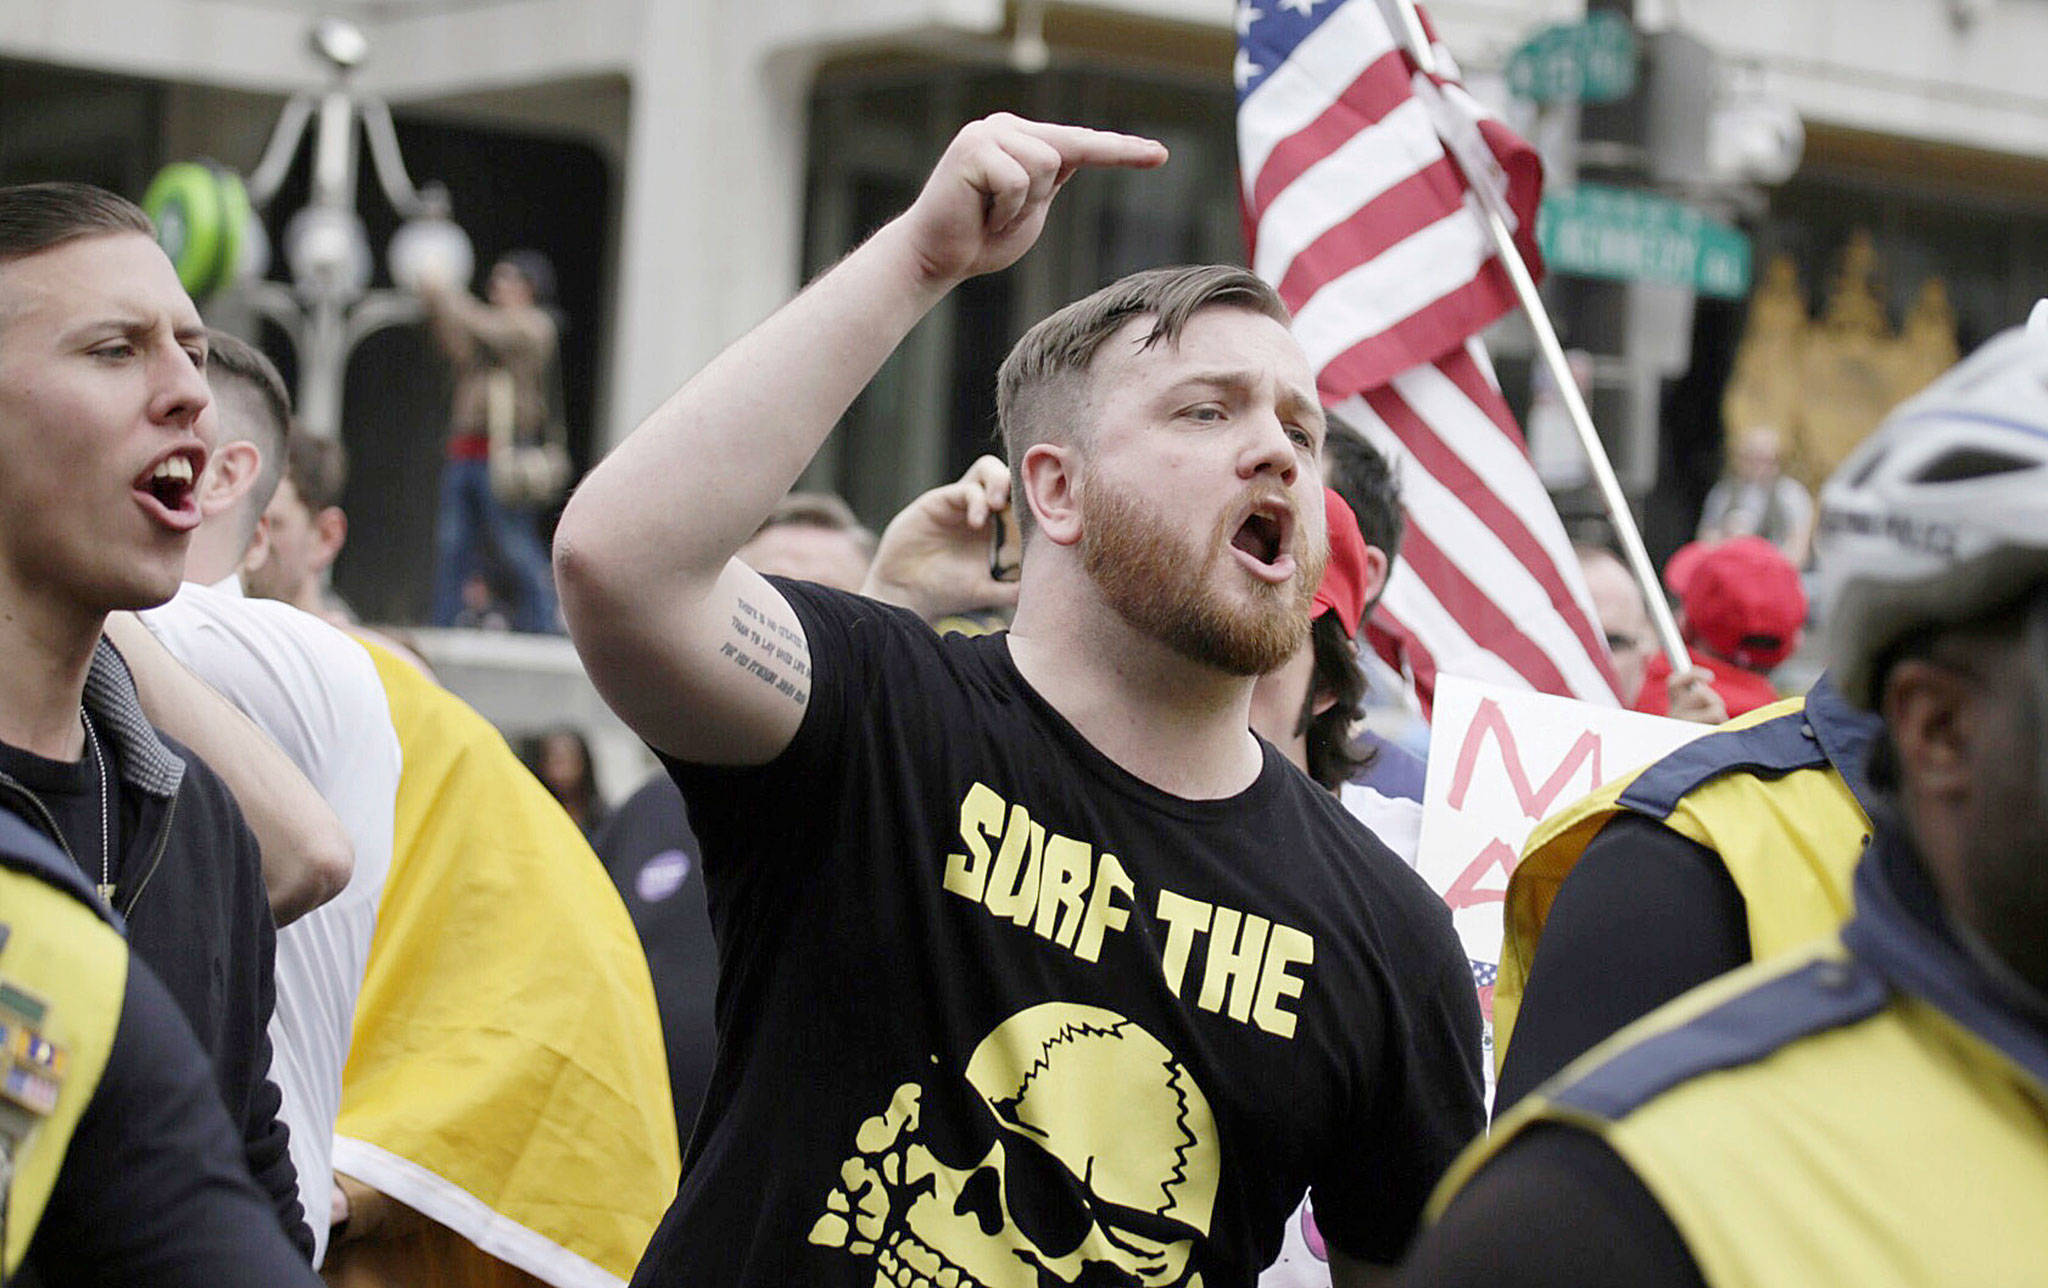 Supporters of President Donald Trump yell at anti-Trump counter demonstrators during a “Make America Great Again” march and rally in support of Trump near Independence Mall in Philadelphia on Saturday. (Elizabeth Robertson/The Philadelphia Inquirer)